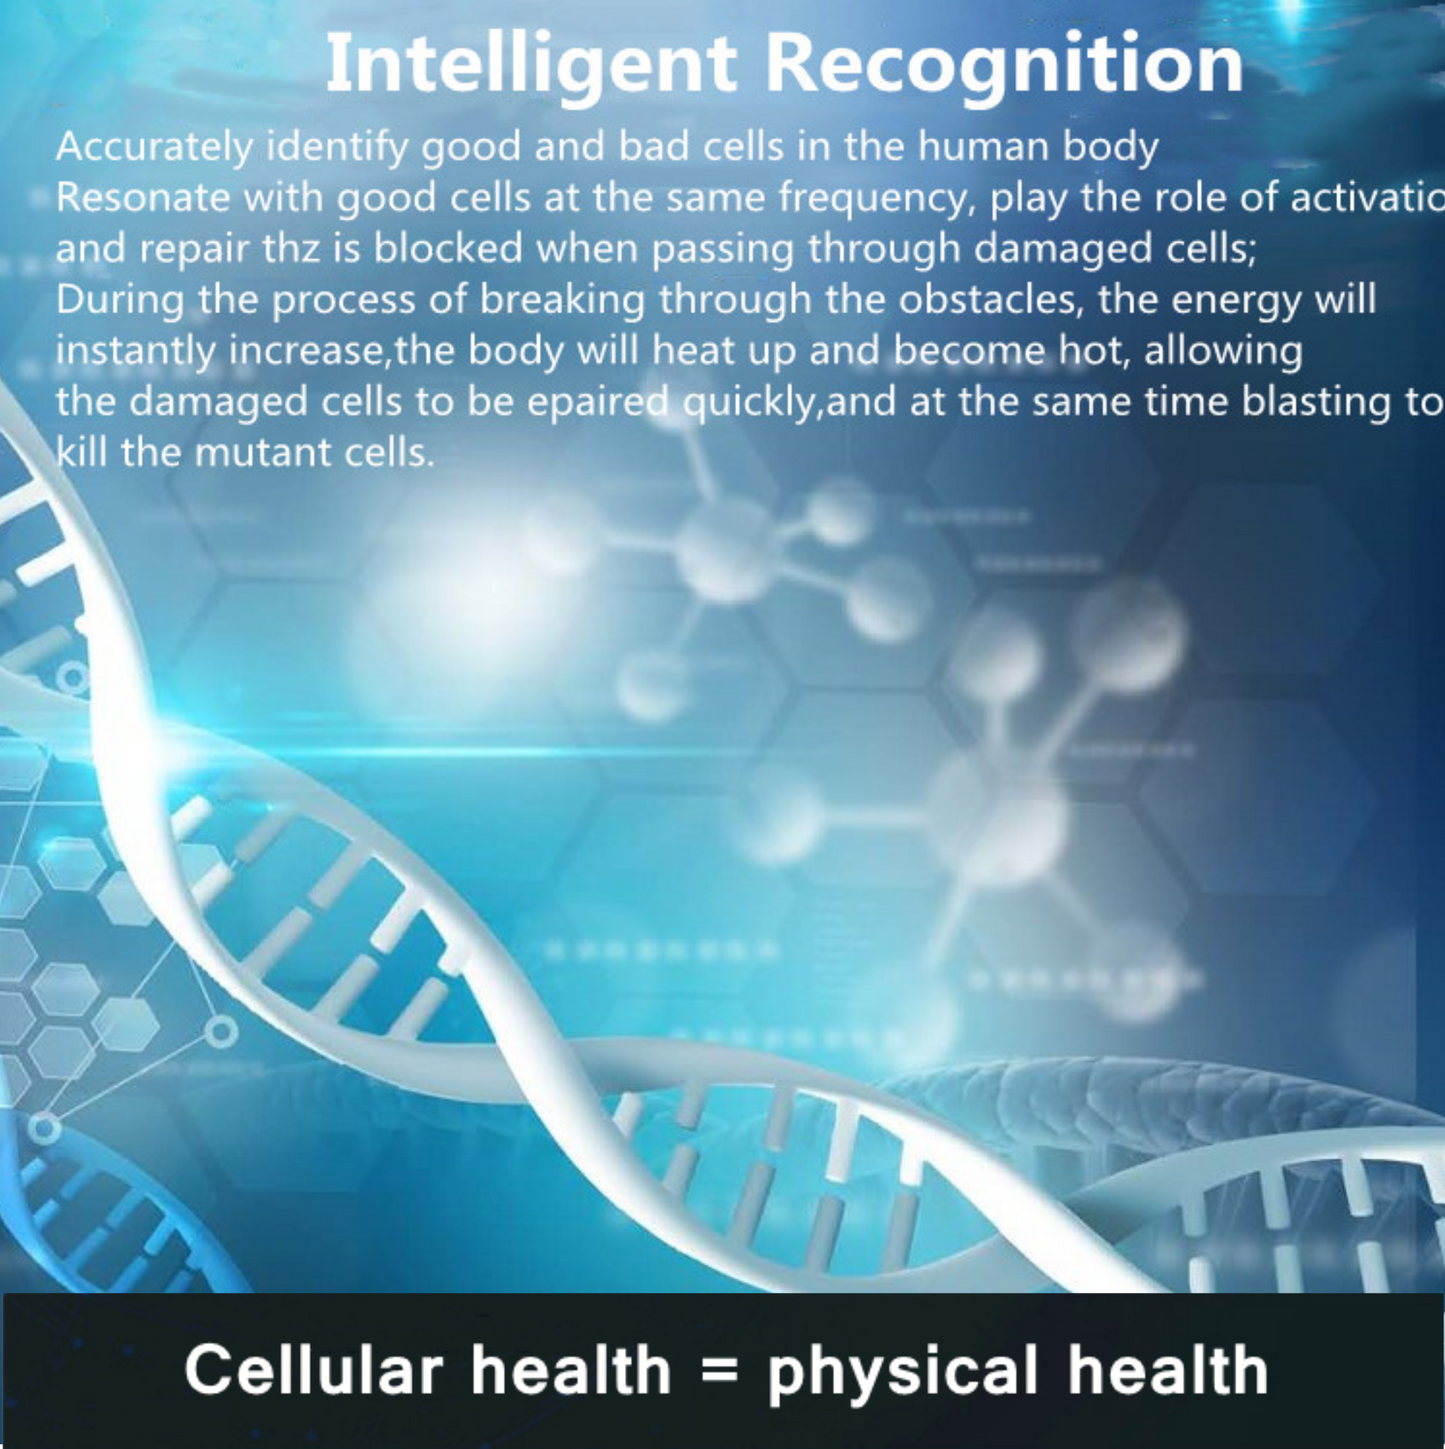 Intelligent Recognition - Cellular health = physical health